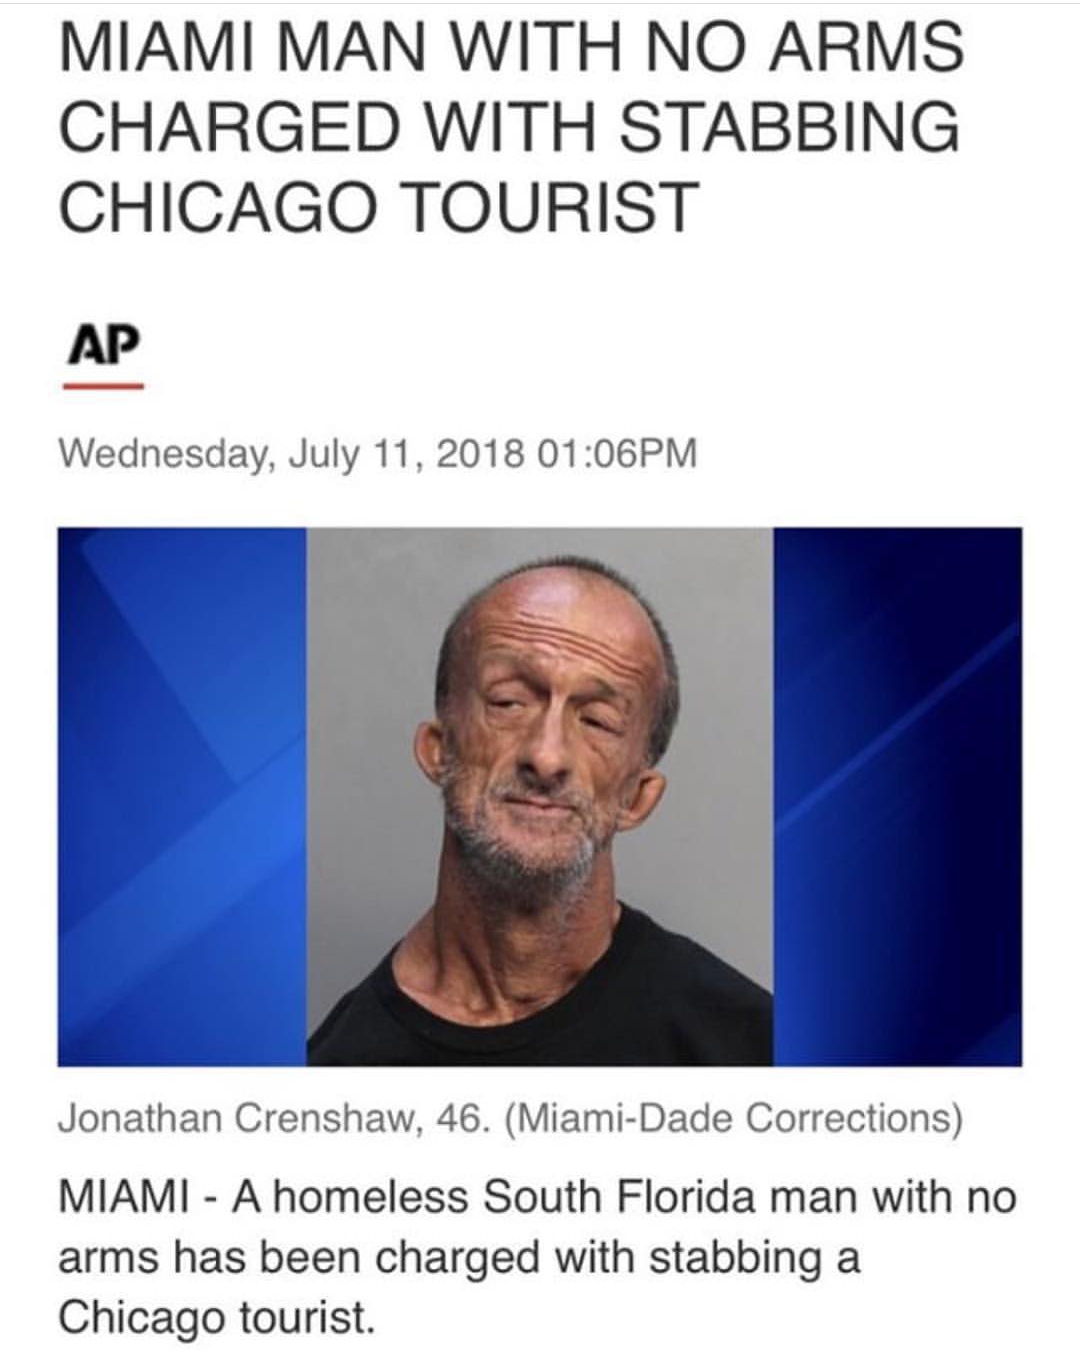 florida man with no arms - Miami Man With No Arms Charged With Stabbing Chicago Tourist Ap Wednesday, Pm Jonathan Crenshaw, 46. MiamiDade Corrections Miami A homeless South Florida man with no arms has been charged with stabbing a Chicago tourist.